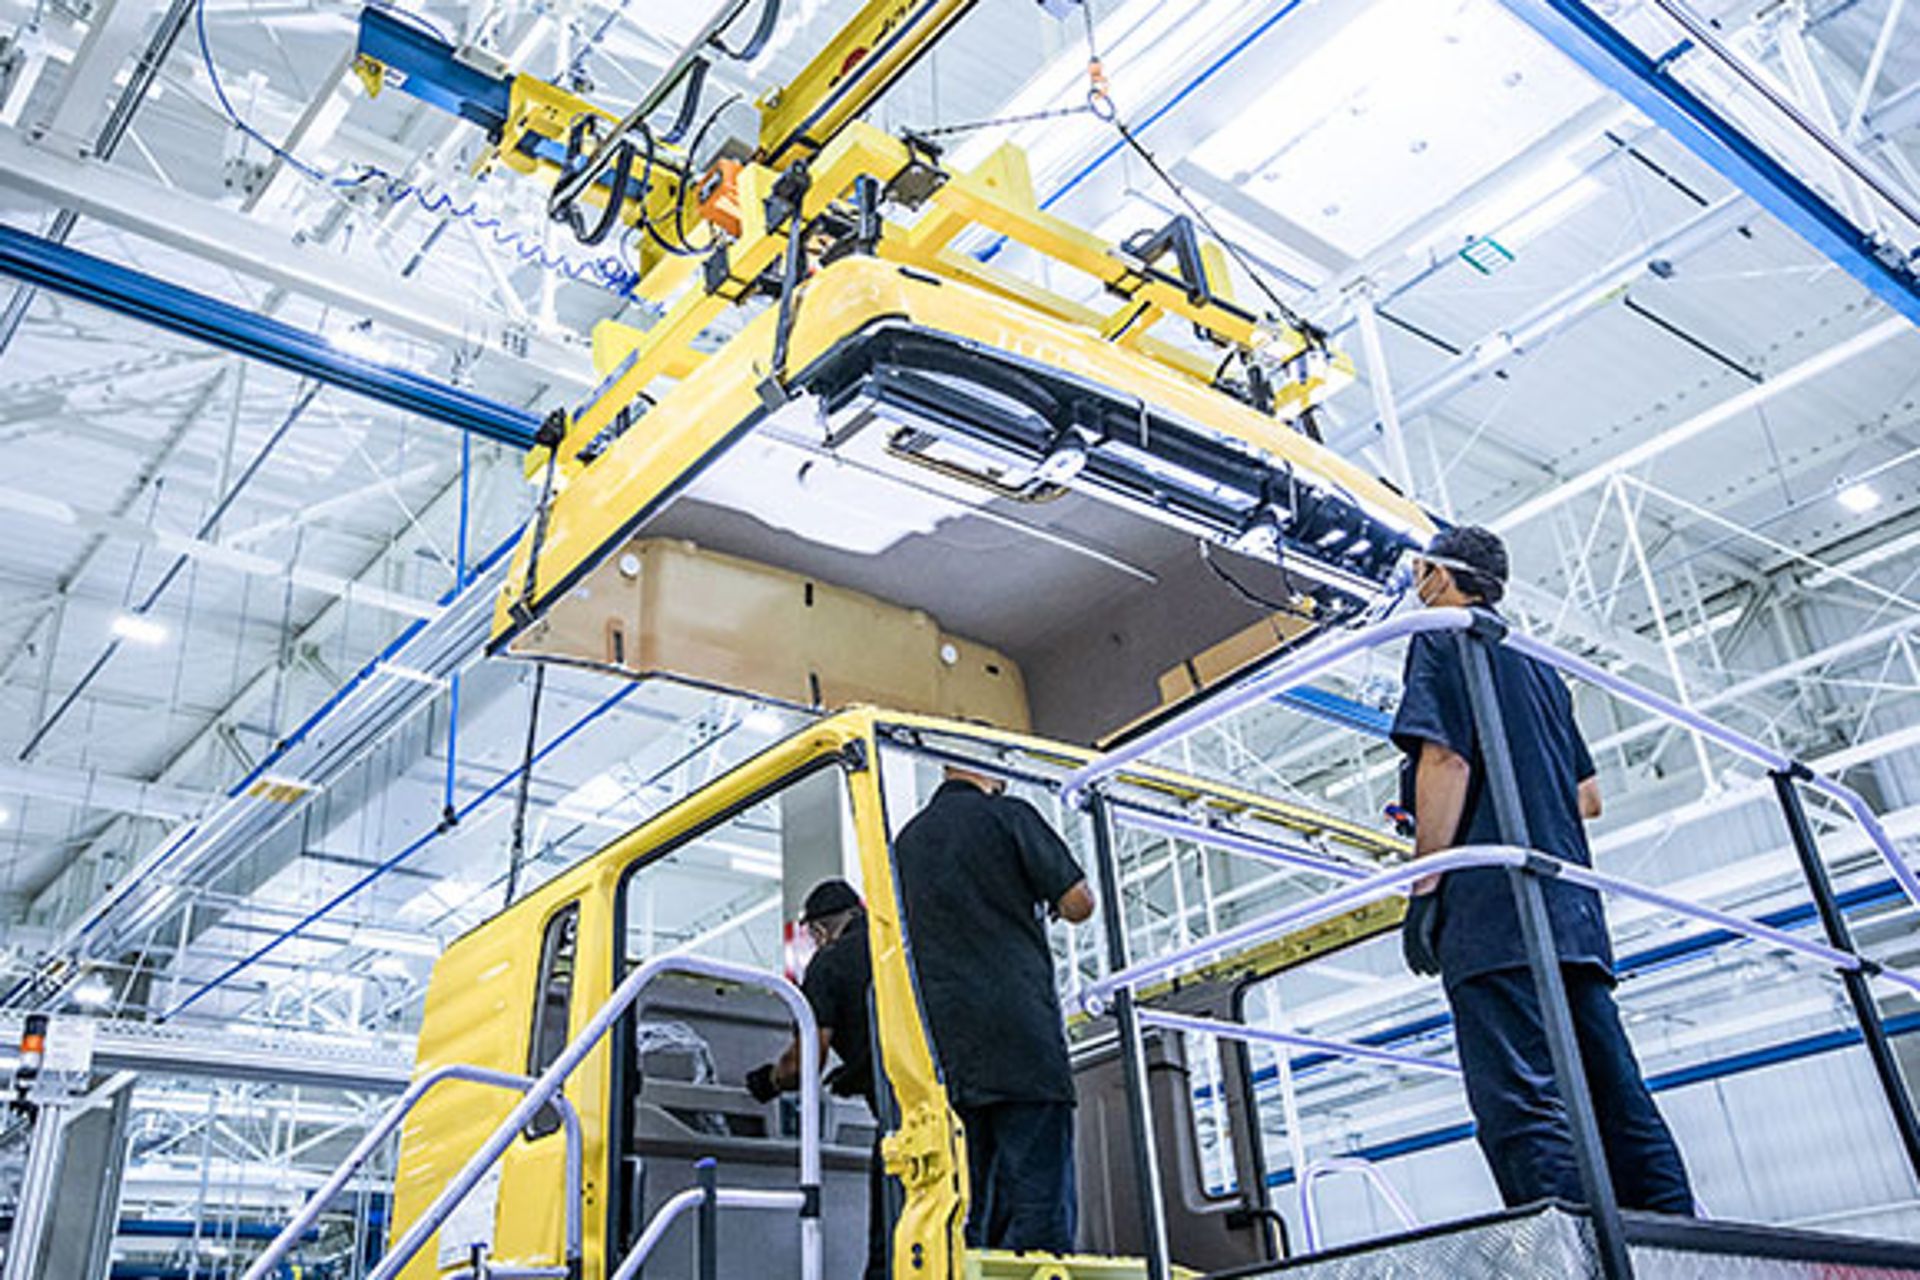 The TRATON brand Volkswagen Caminhões e Ônibus (VWCO) is building the Meteor truck series in a completely new digital manufacturing facility at the plant in Resende, Brazil. 
                 